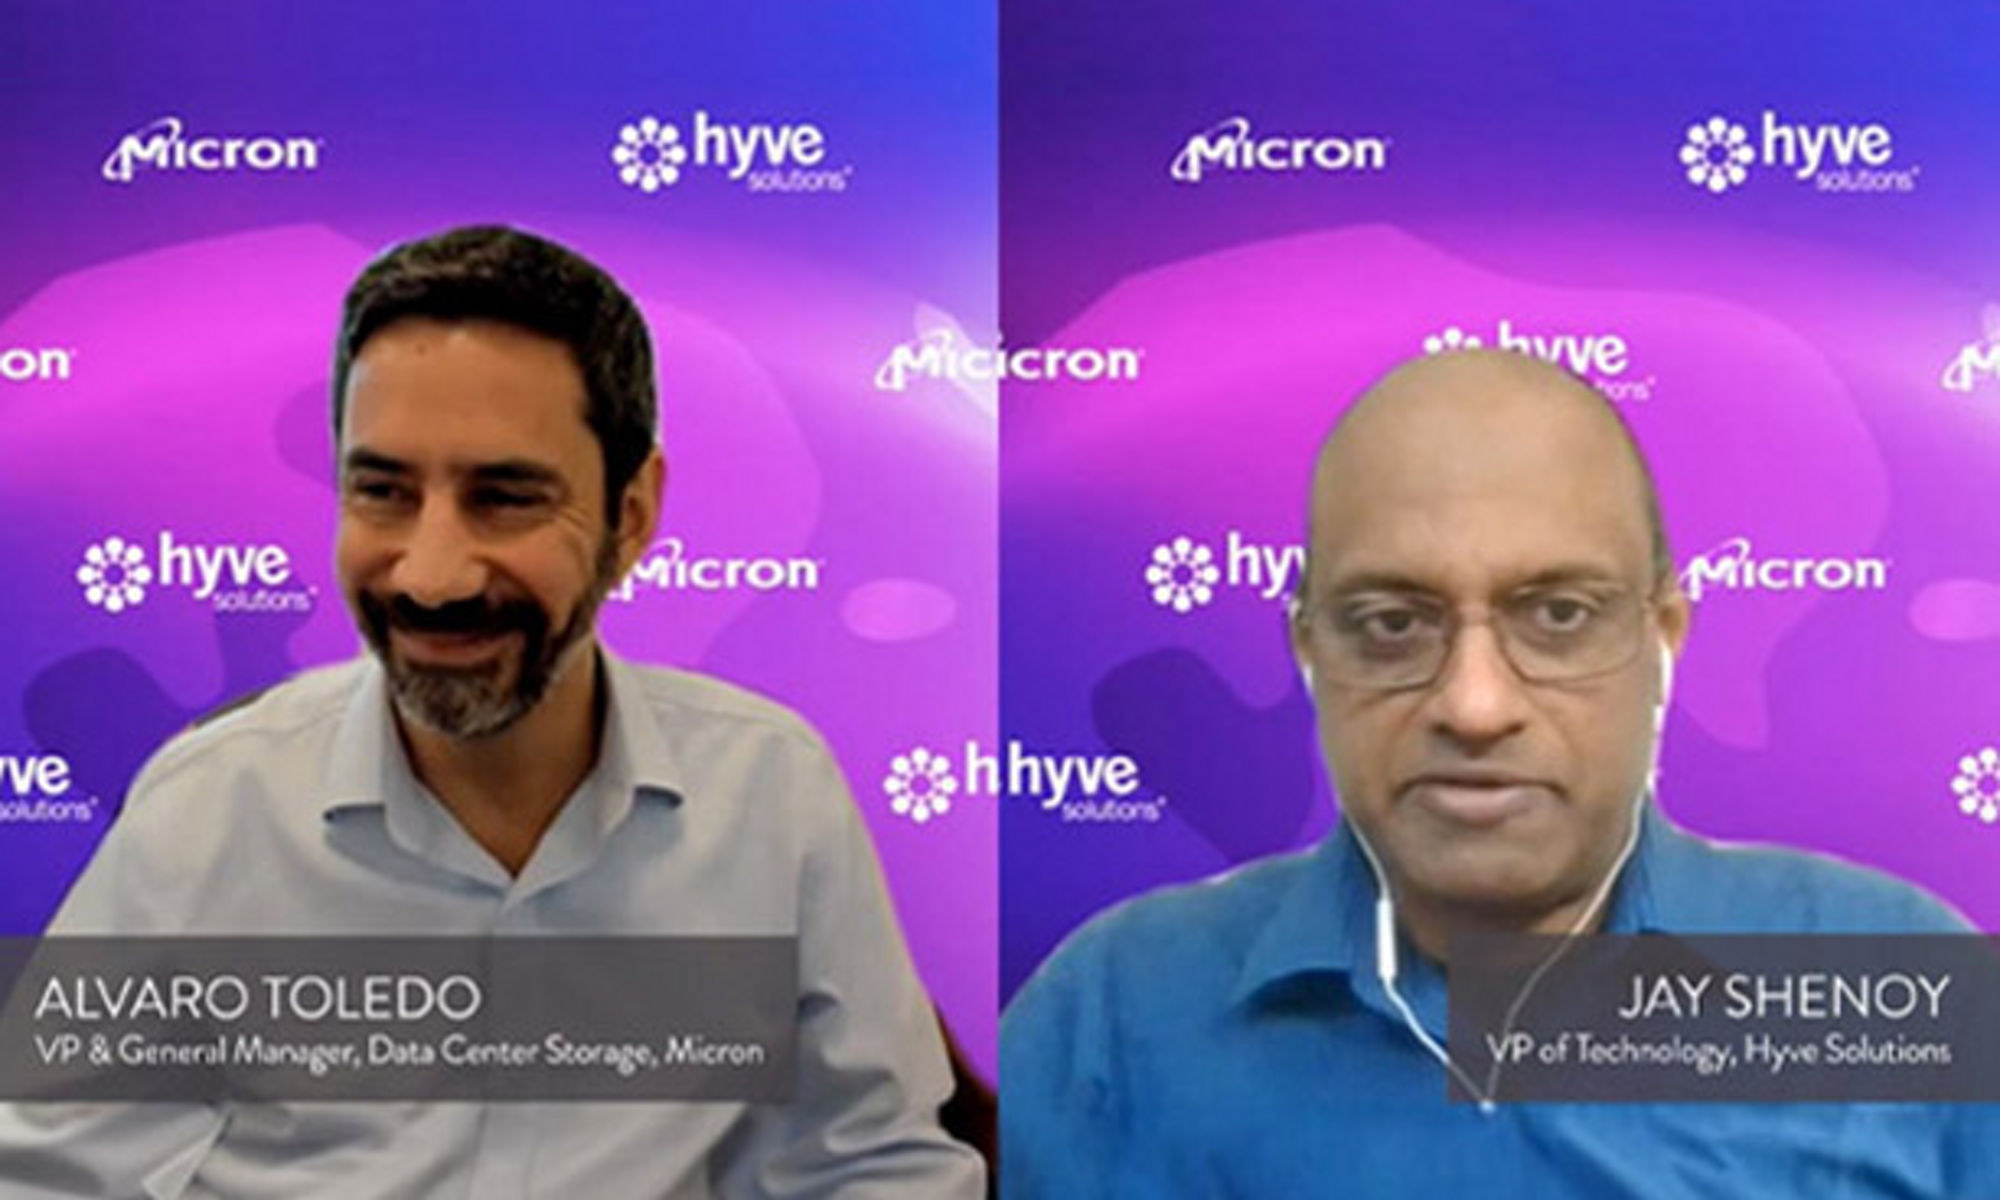 Video of Jay Shenoy at Hyve Solutions and Alvaro Toledo Micron’s VP